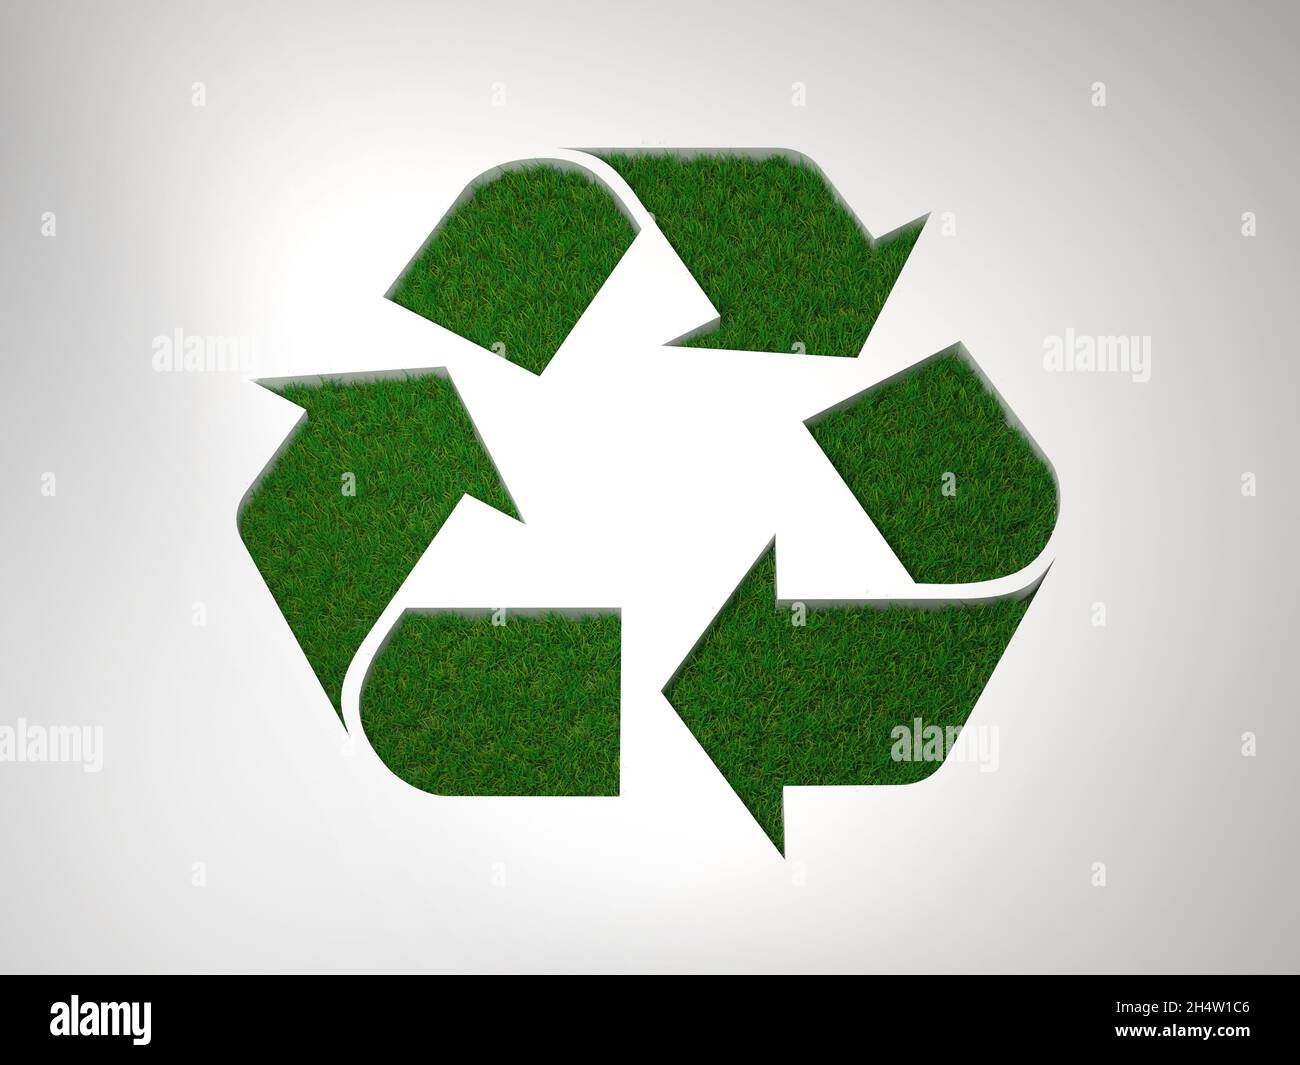 3d rendering of the recycling symbol made with 3d grass on white background Stock Photo